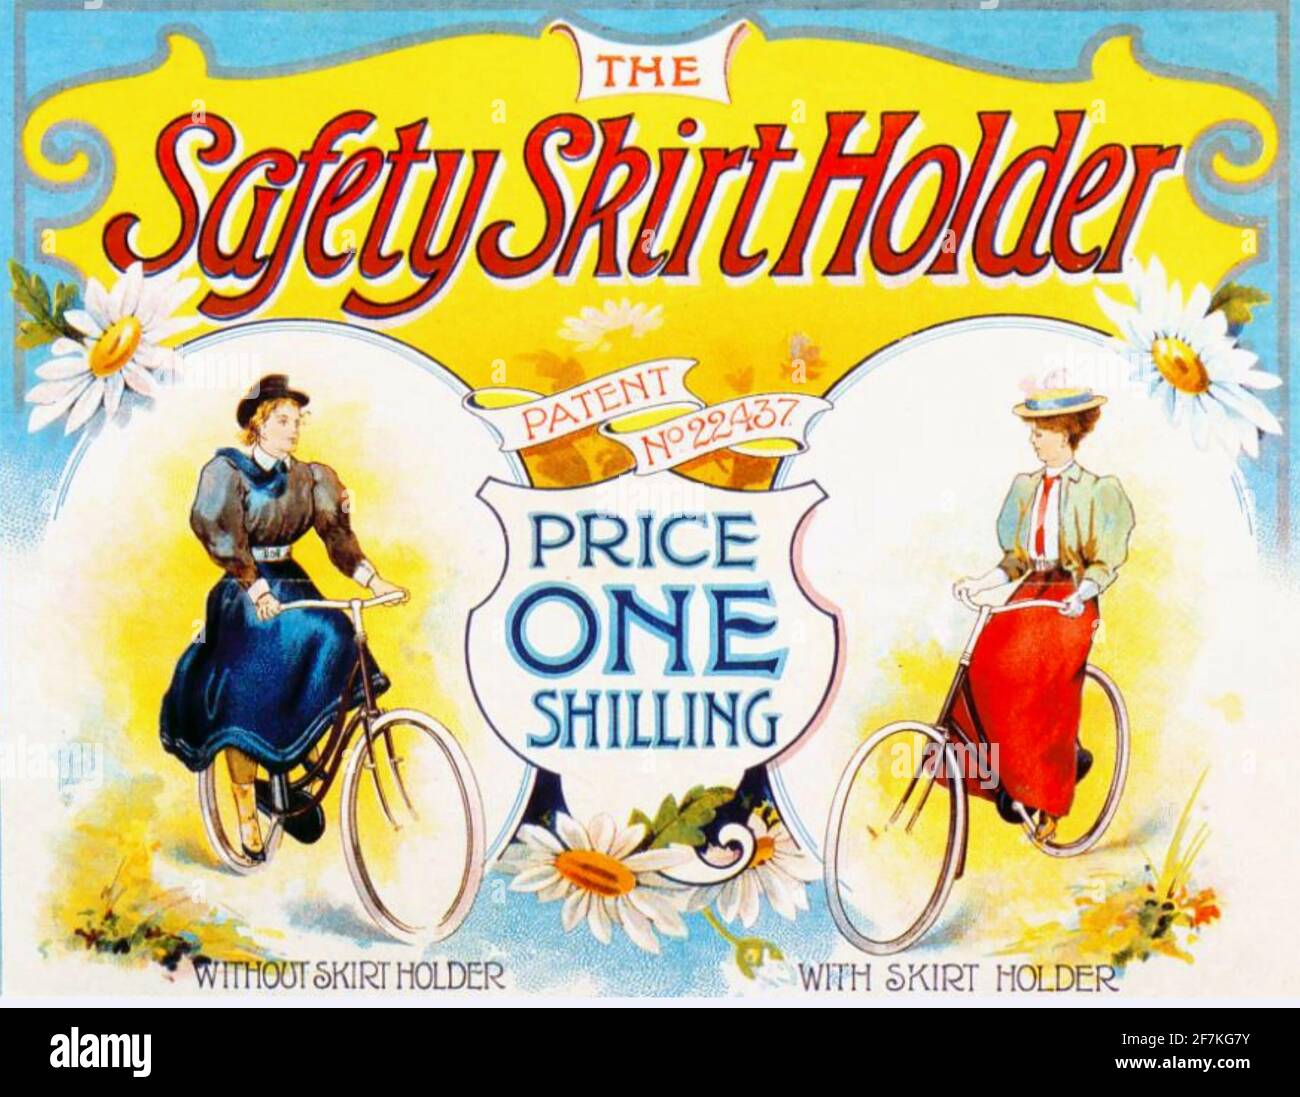 SAFETY SKIRT HOLDER advert about 1890 Stock Photo